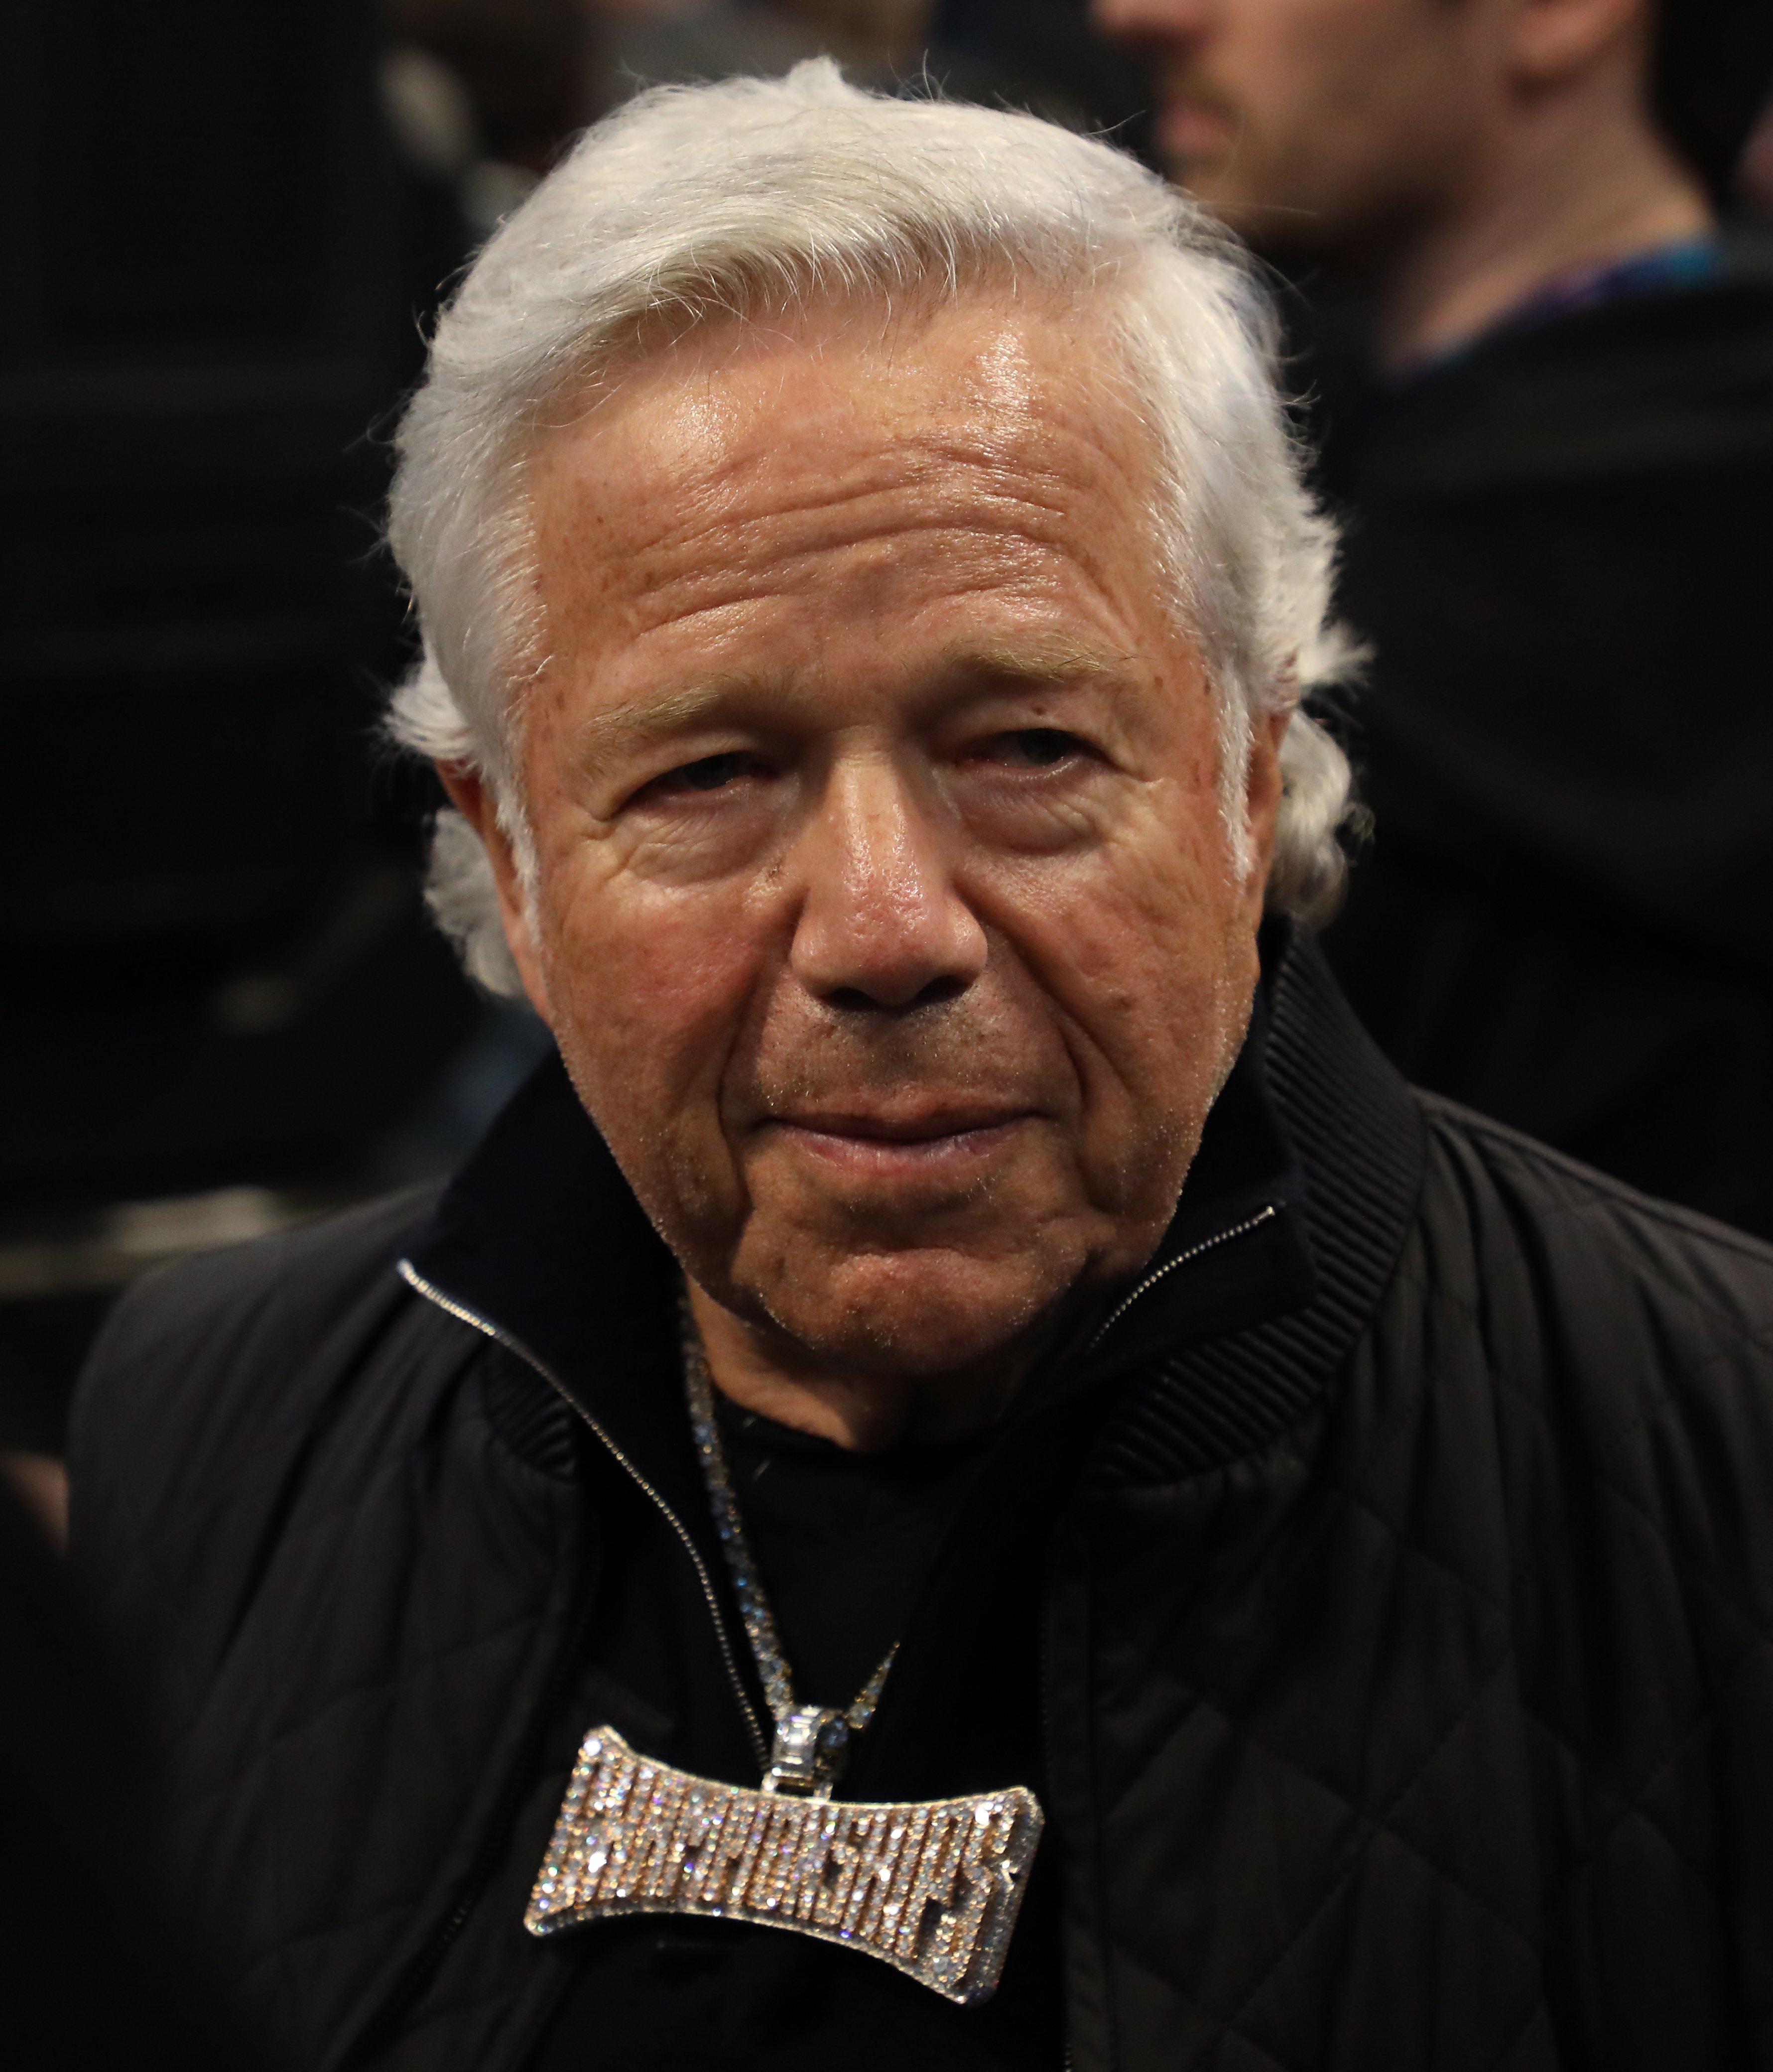 Robert Kraft at the 2019 NBA All-Star Weekend at Spectrum Center | Photo: Getty Images